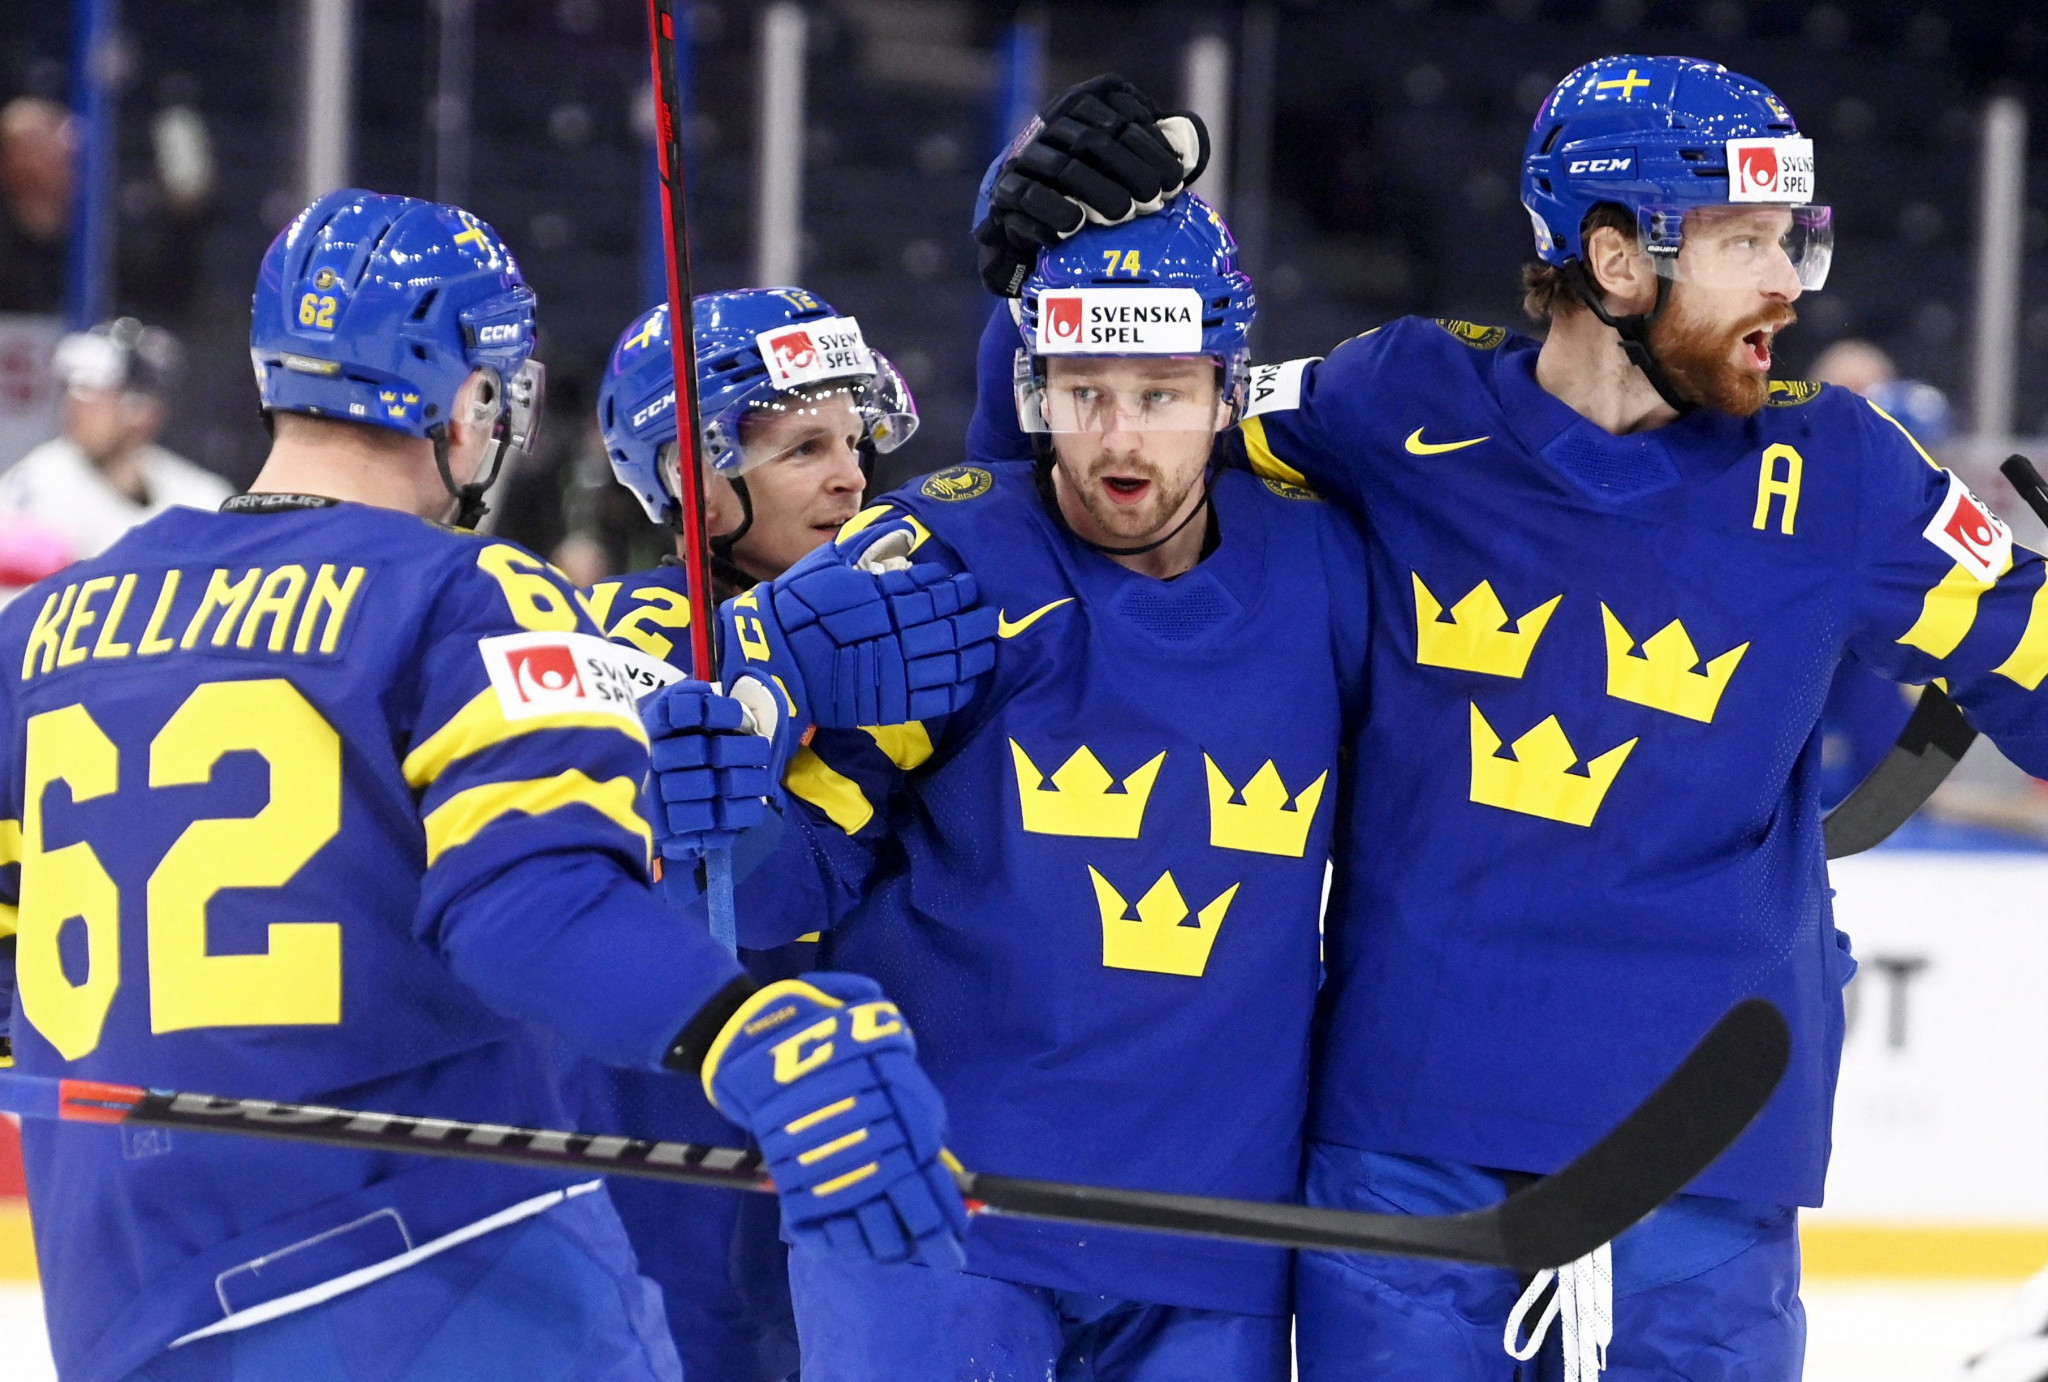 Sweden dominated Britain to claim their third win of the competition ©Getty Images